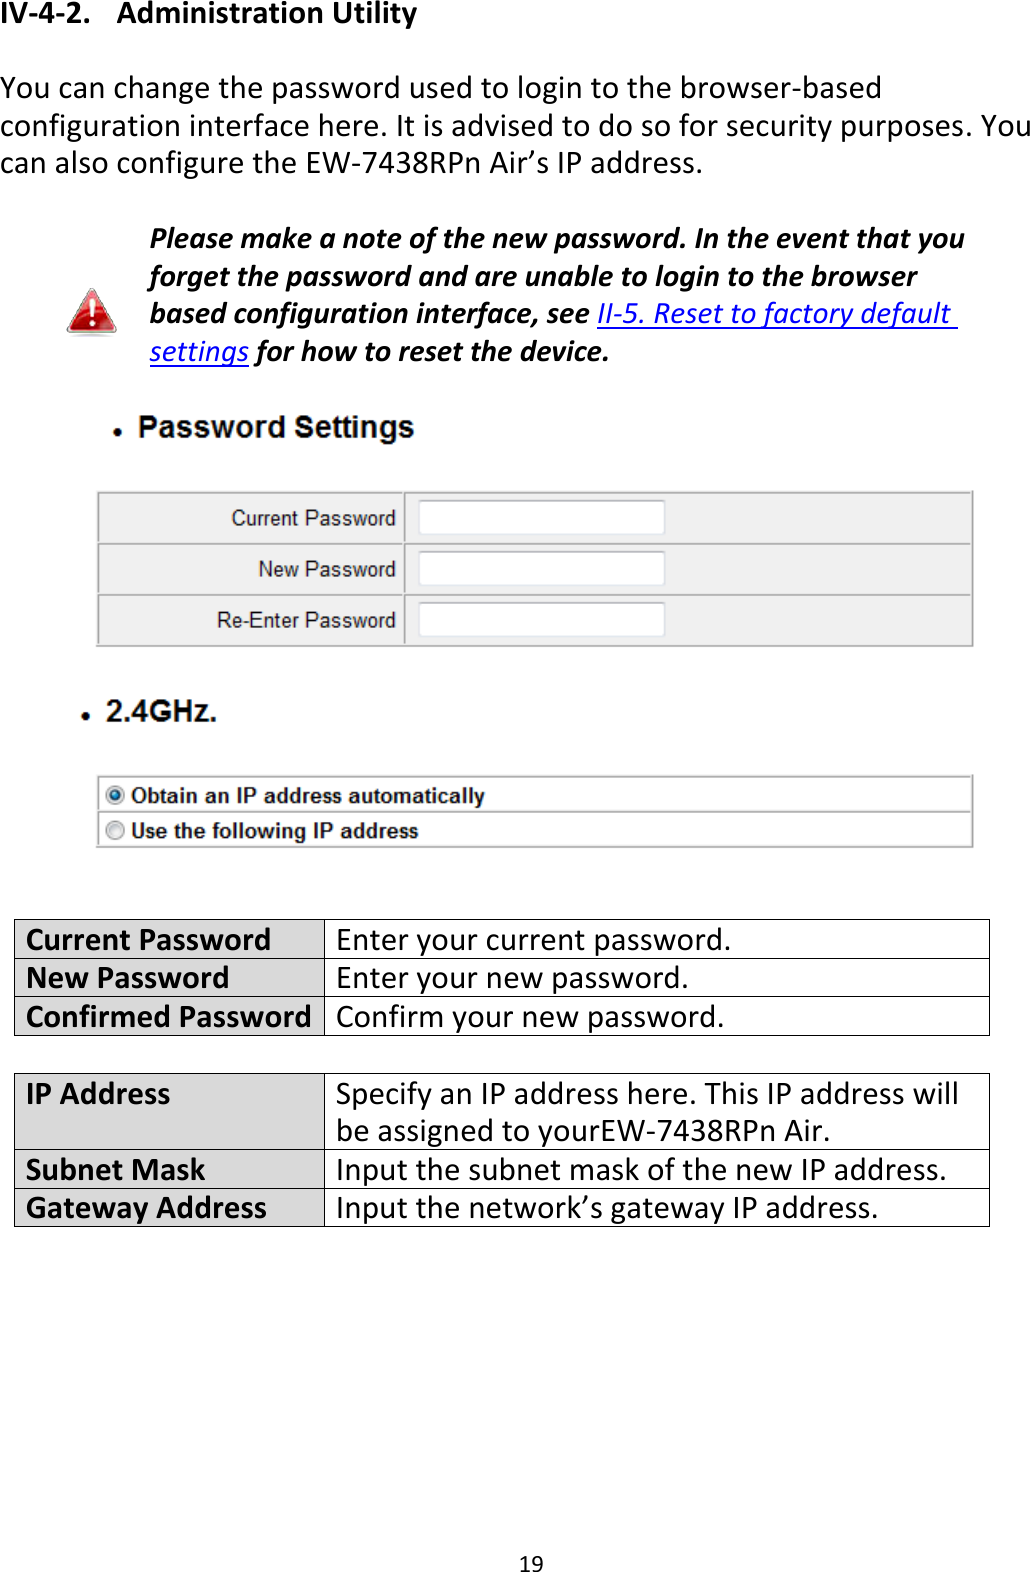 19 IV-4-2.   Administration Utility  You can change the password used to login to the browser-based configuration interface here. It is advised to do so for security purposes. You can also configure the EW-7438RPn Air’s IP address.  Please make a note of the new password. In the event that you forget the password and are unable to login to the browser based configuration interface, see II-5. Reset to factory default settings for how to reset the device.    Current Password Enter your current password. New Password Enter your new password. Confirmed Password Confirm your new password.  IP Address Specify an IP address here. This IP address will be assigned to yourEW-7438RPn Air. Subnet Mask Input the subnet mask of the new IP address. Gateway Address Input the network’s gateway IP address.  